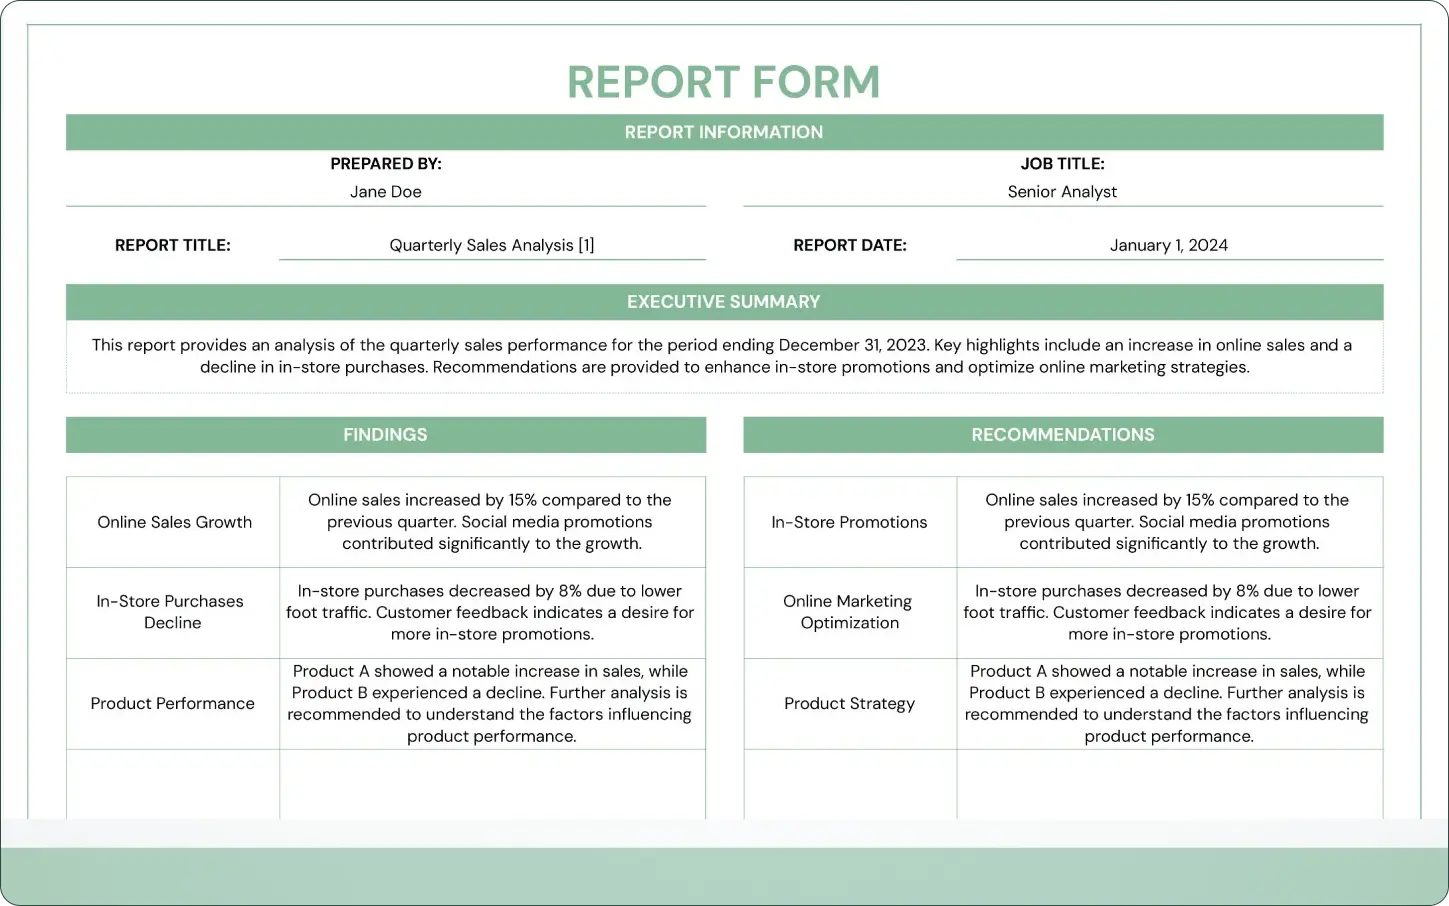 A form template from Excel, perfect for prototyping reports and forms. Minimalistic with green labels and a white background